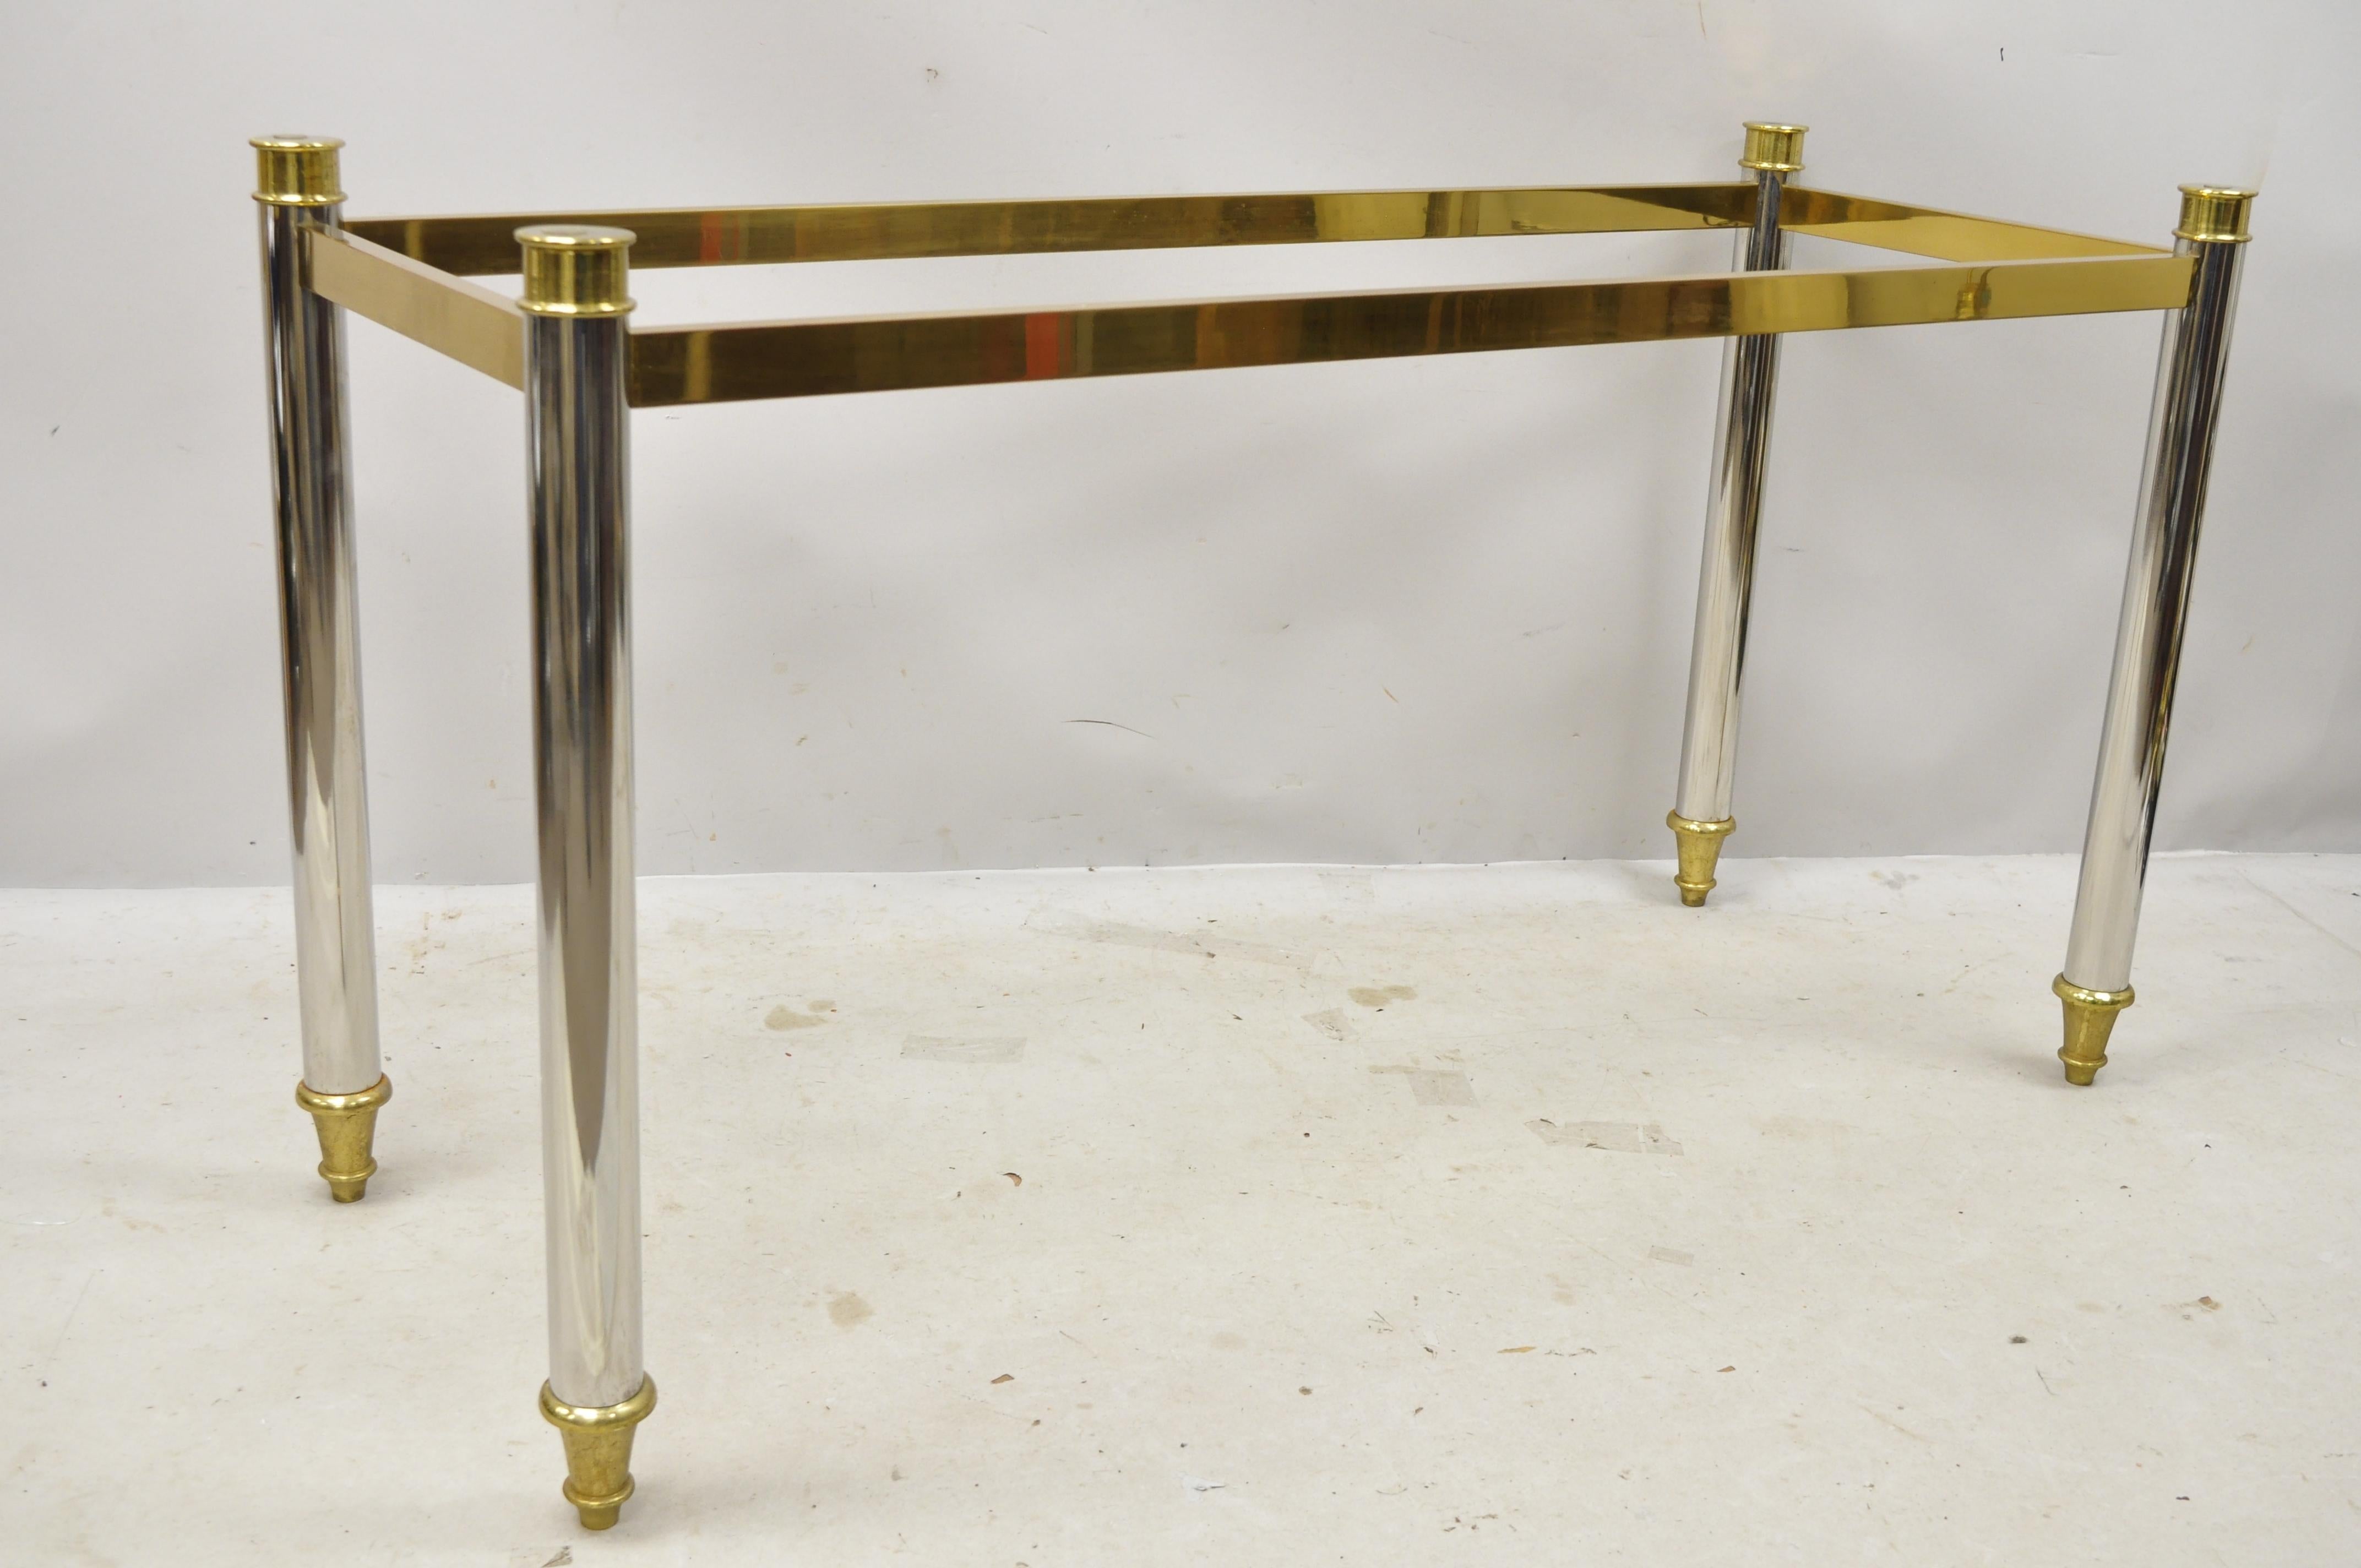 Maison Jansen style steel chrome and brass Hollywood Regency console table base. Item features heavy chrome-plated steel frame, brass accents and feet, remarkable quality, no glass top, overall very nice, circa mid-late 20th century. Measurements: